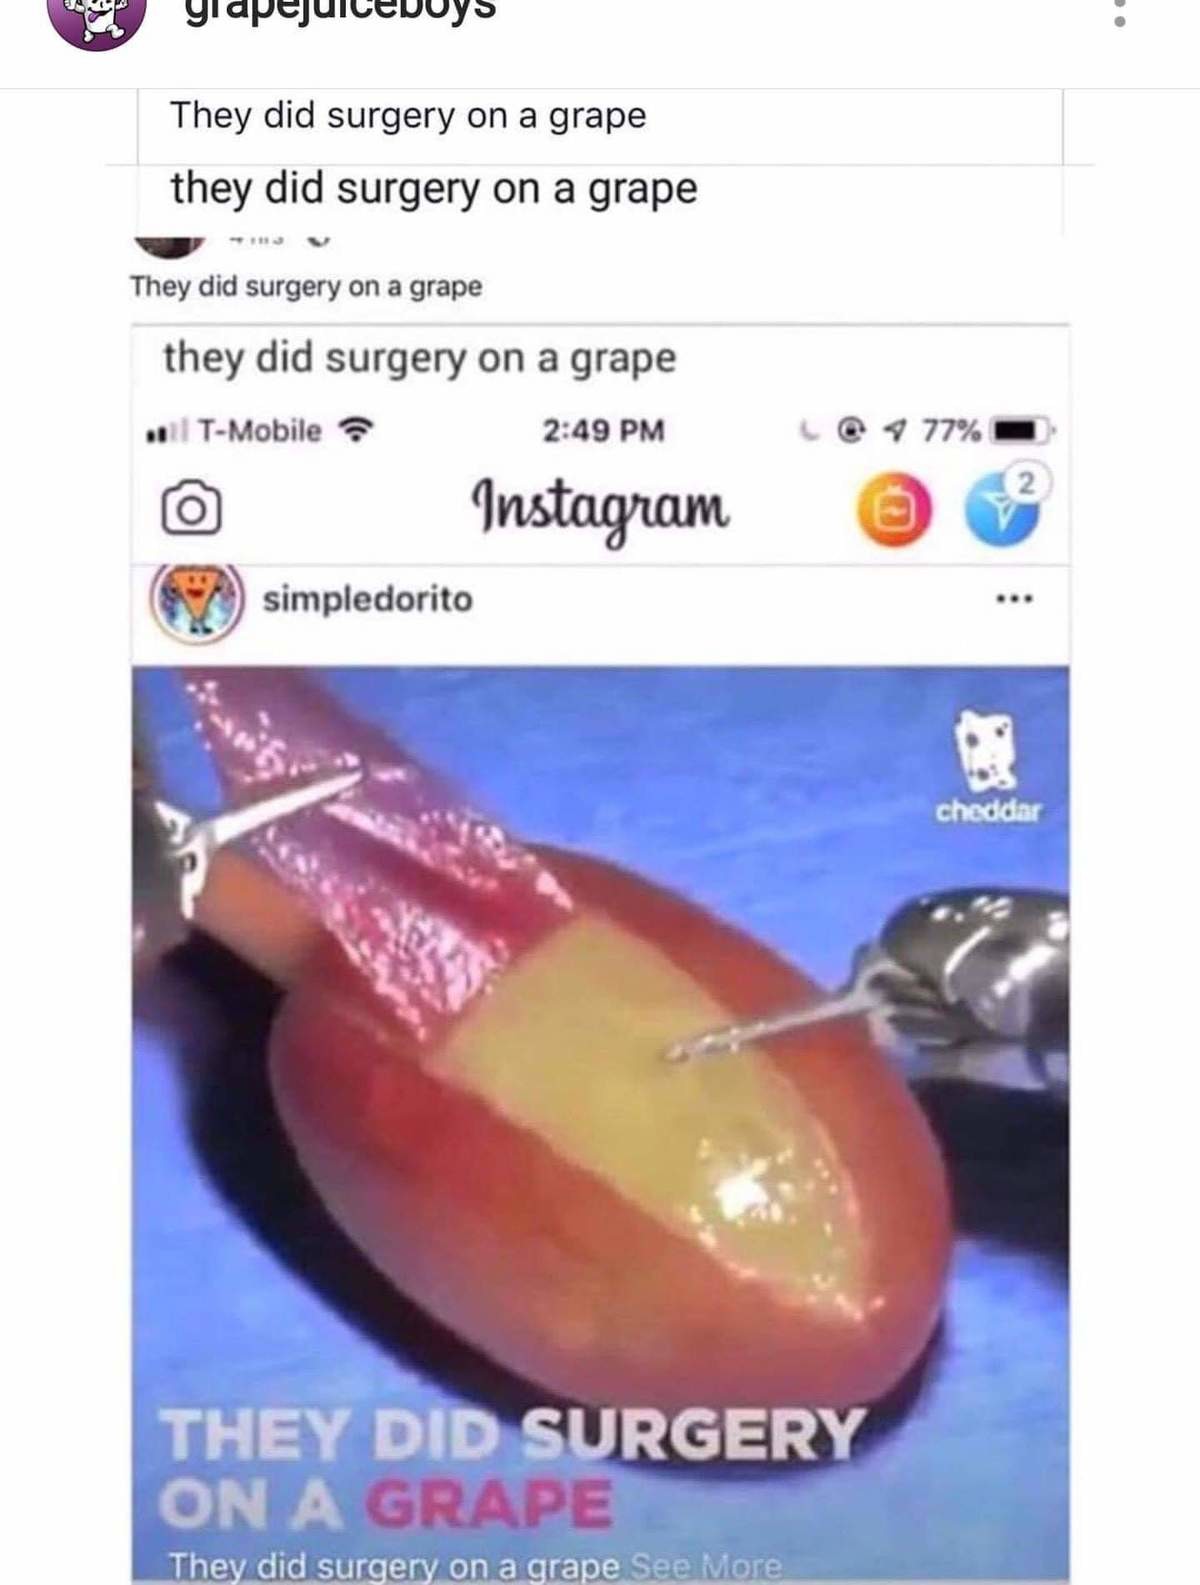 They did surgery on a grape. .. Revolver Ocelot